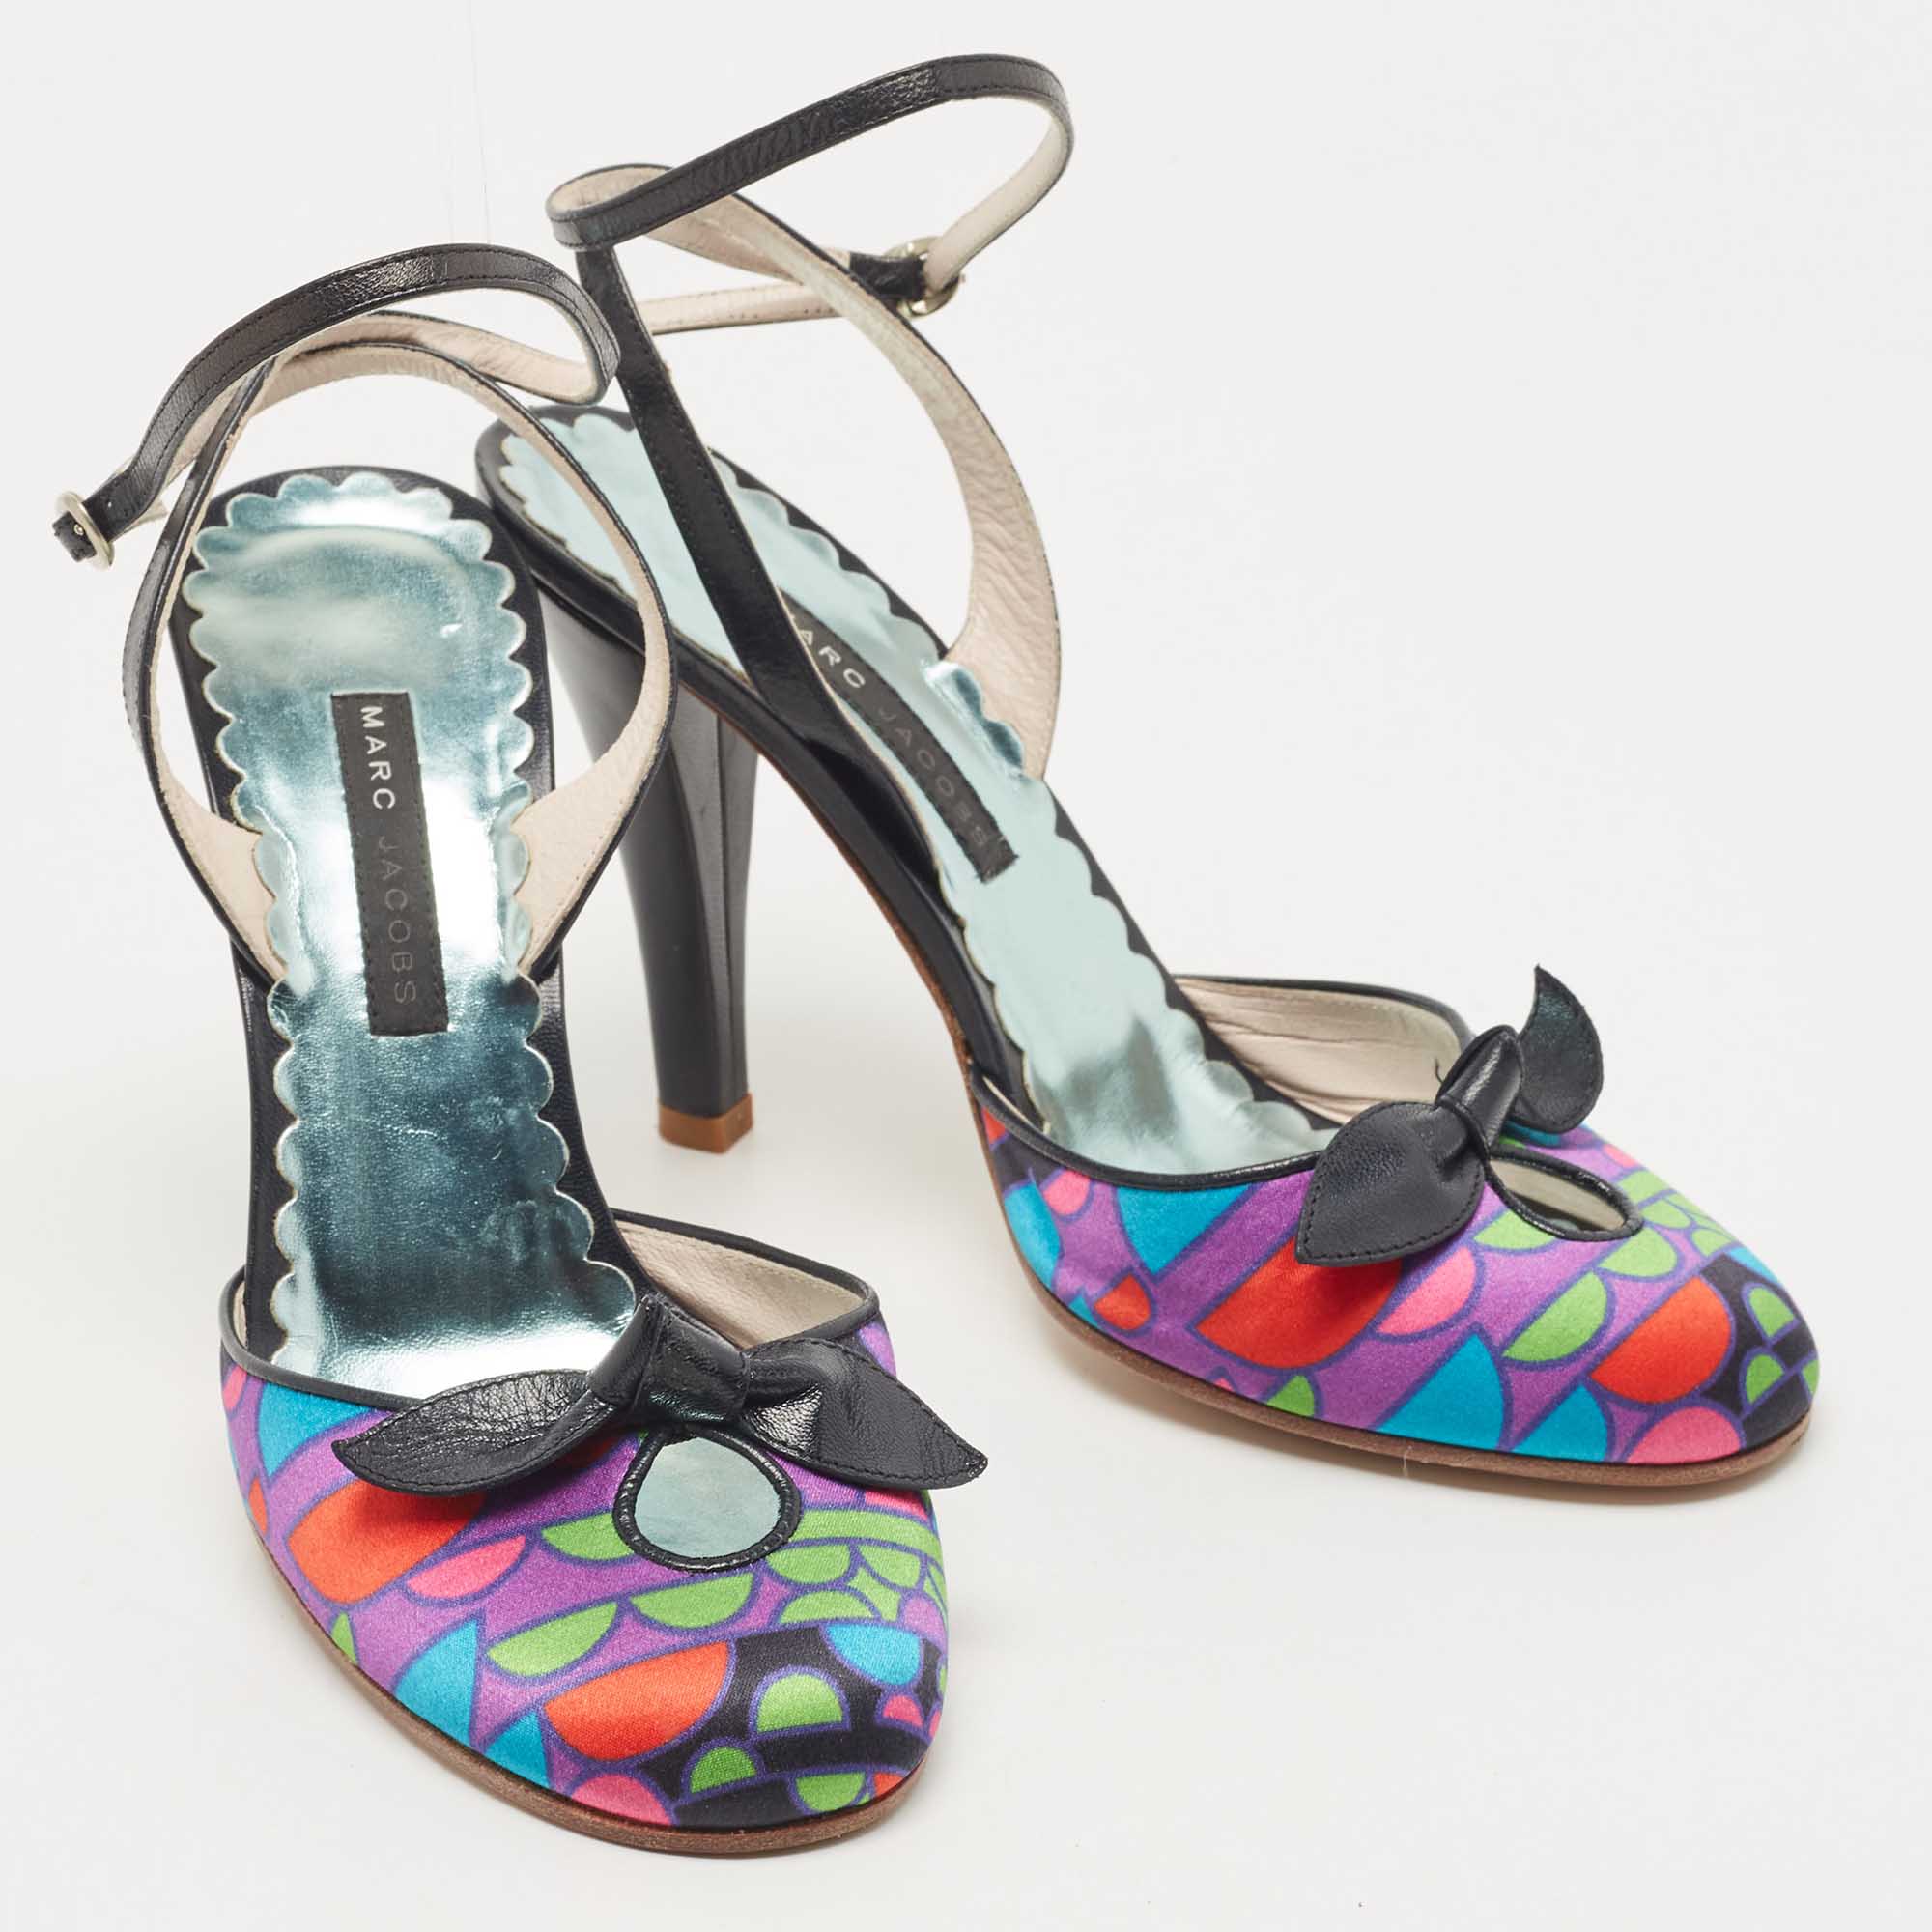 Marc Jacobs Multicolor Printed Satin And Leather Ankle Strap Sandals Size 37.5